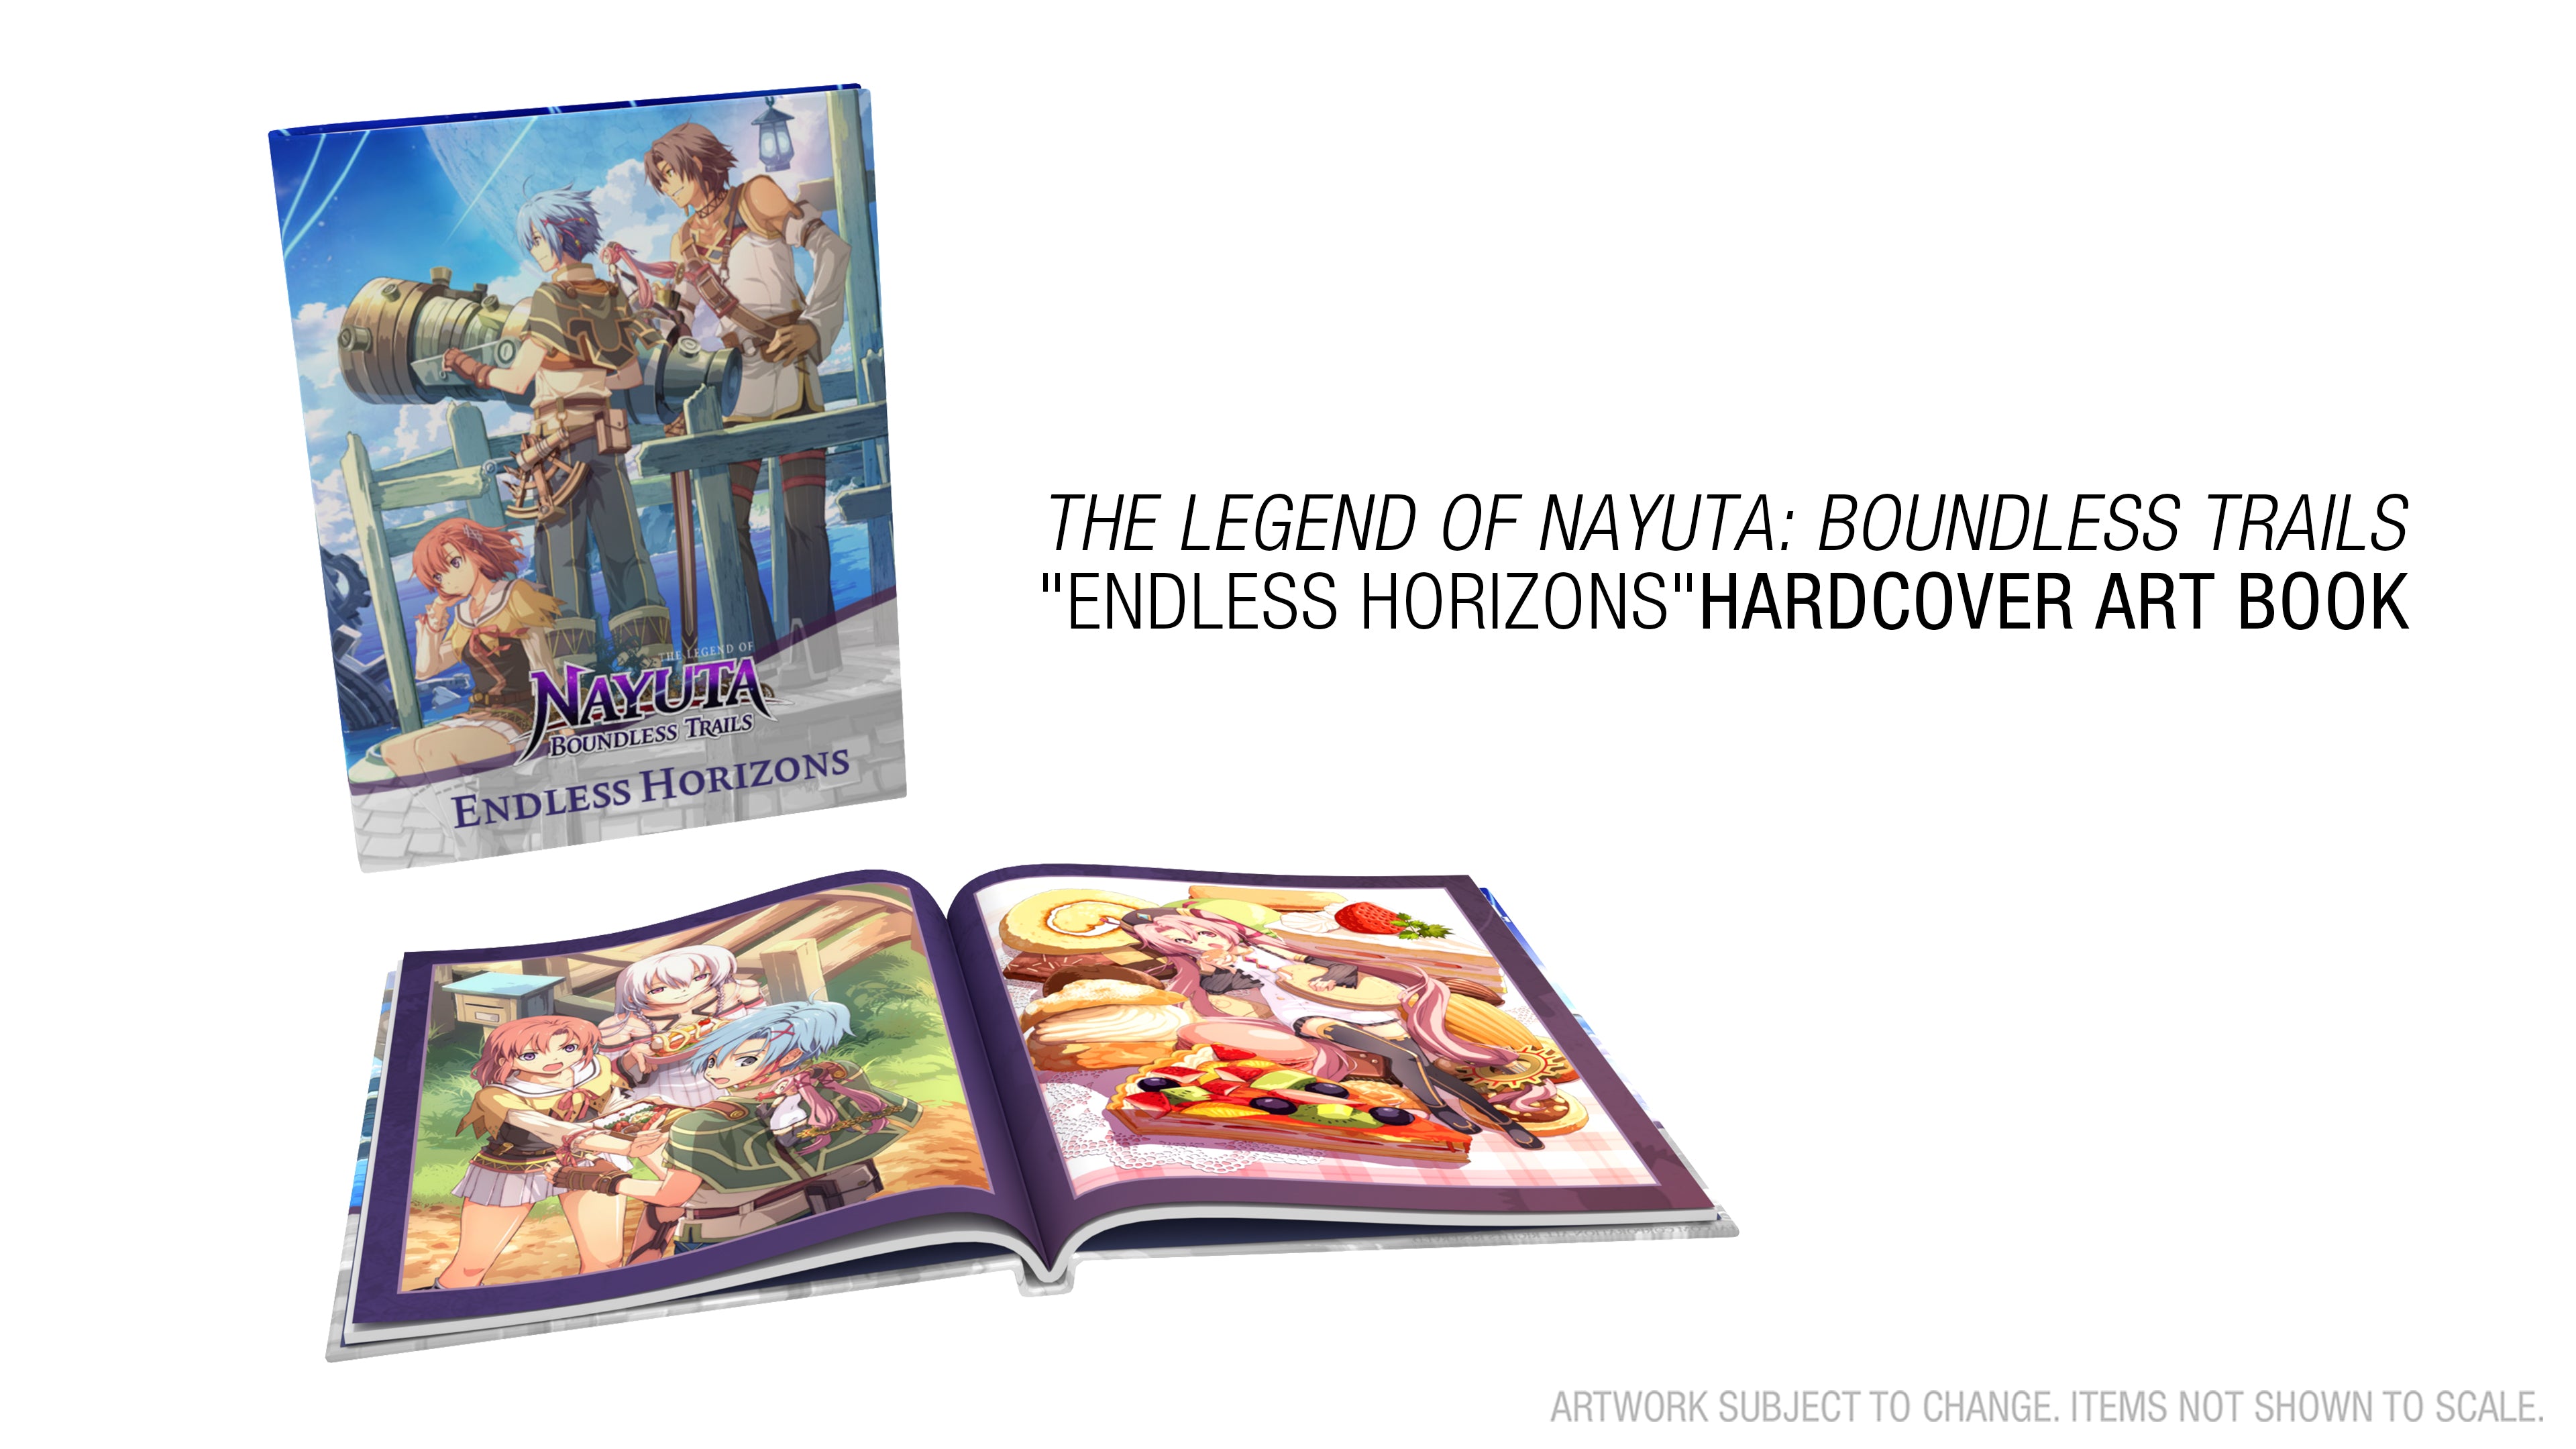 The Legend of Nayuta: Boundless Trails - Limited Edition - PS4®